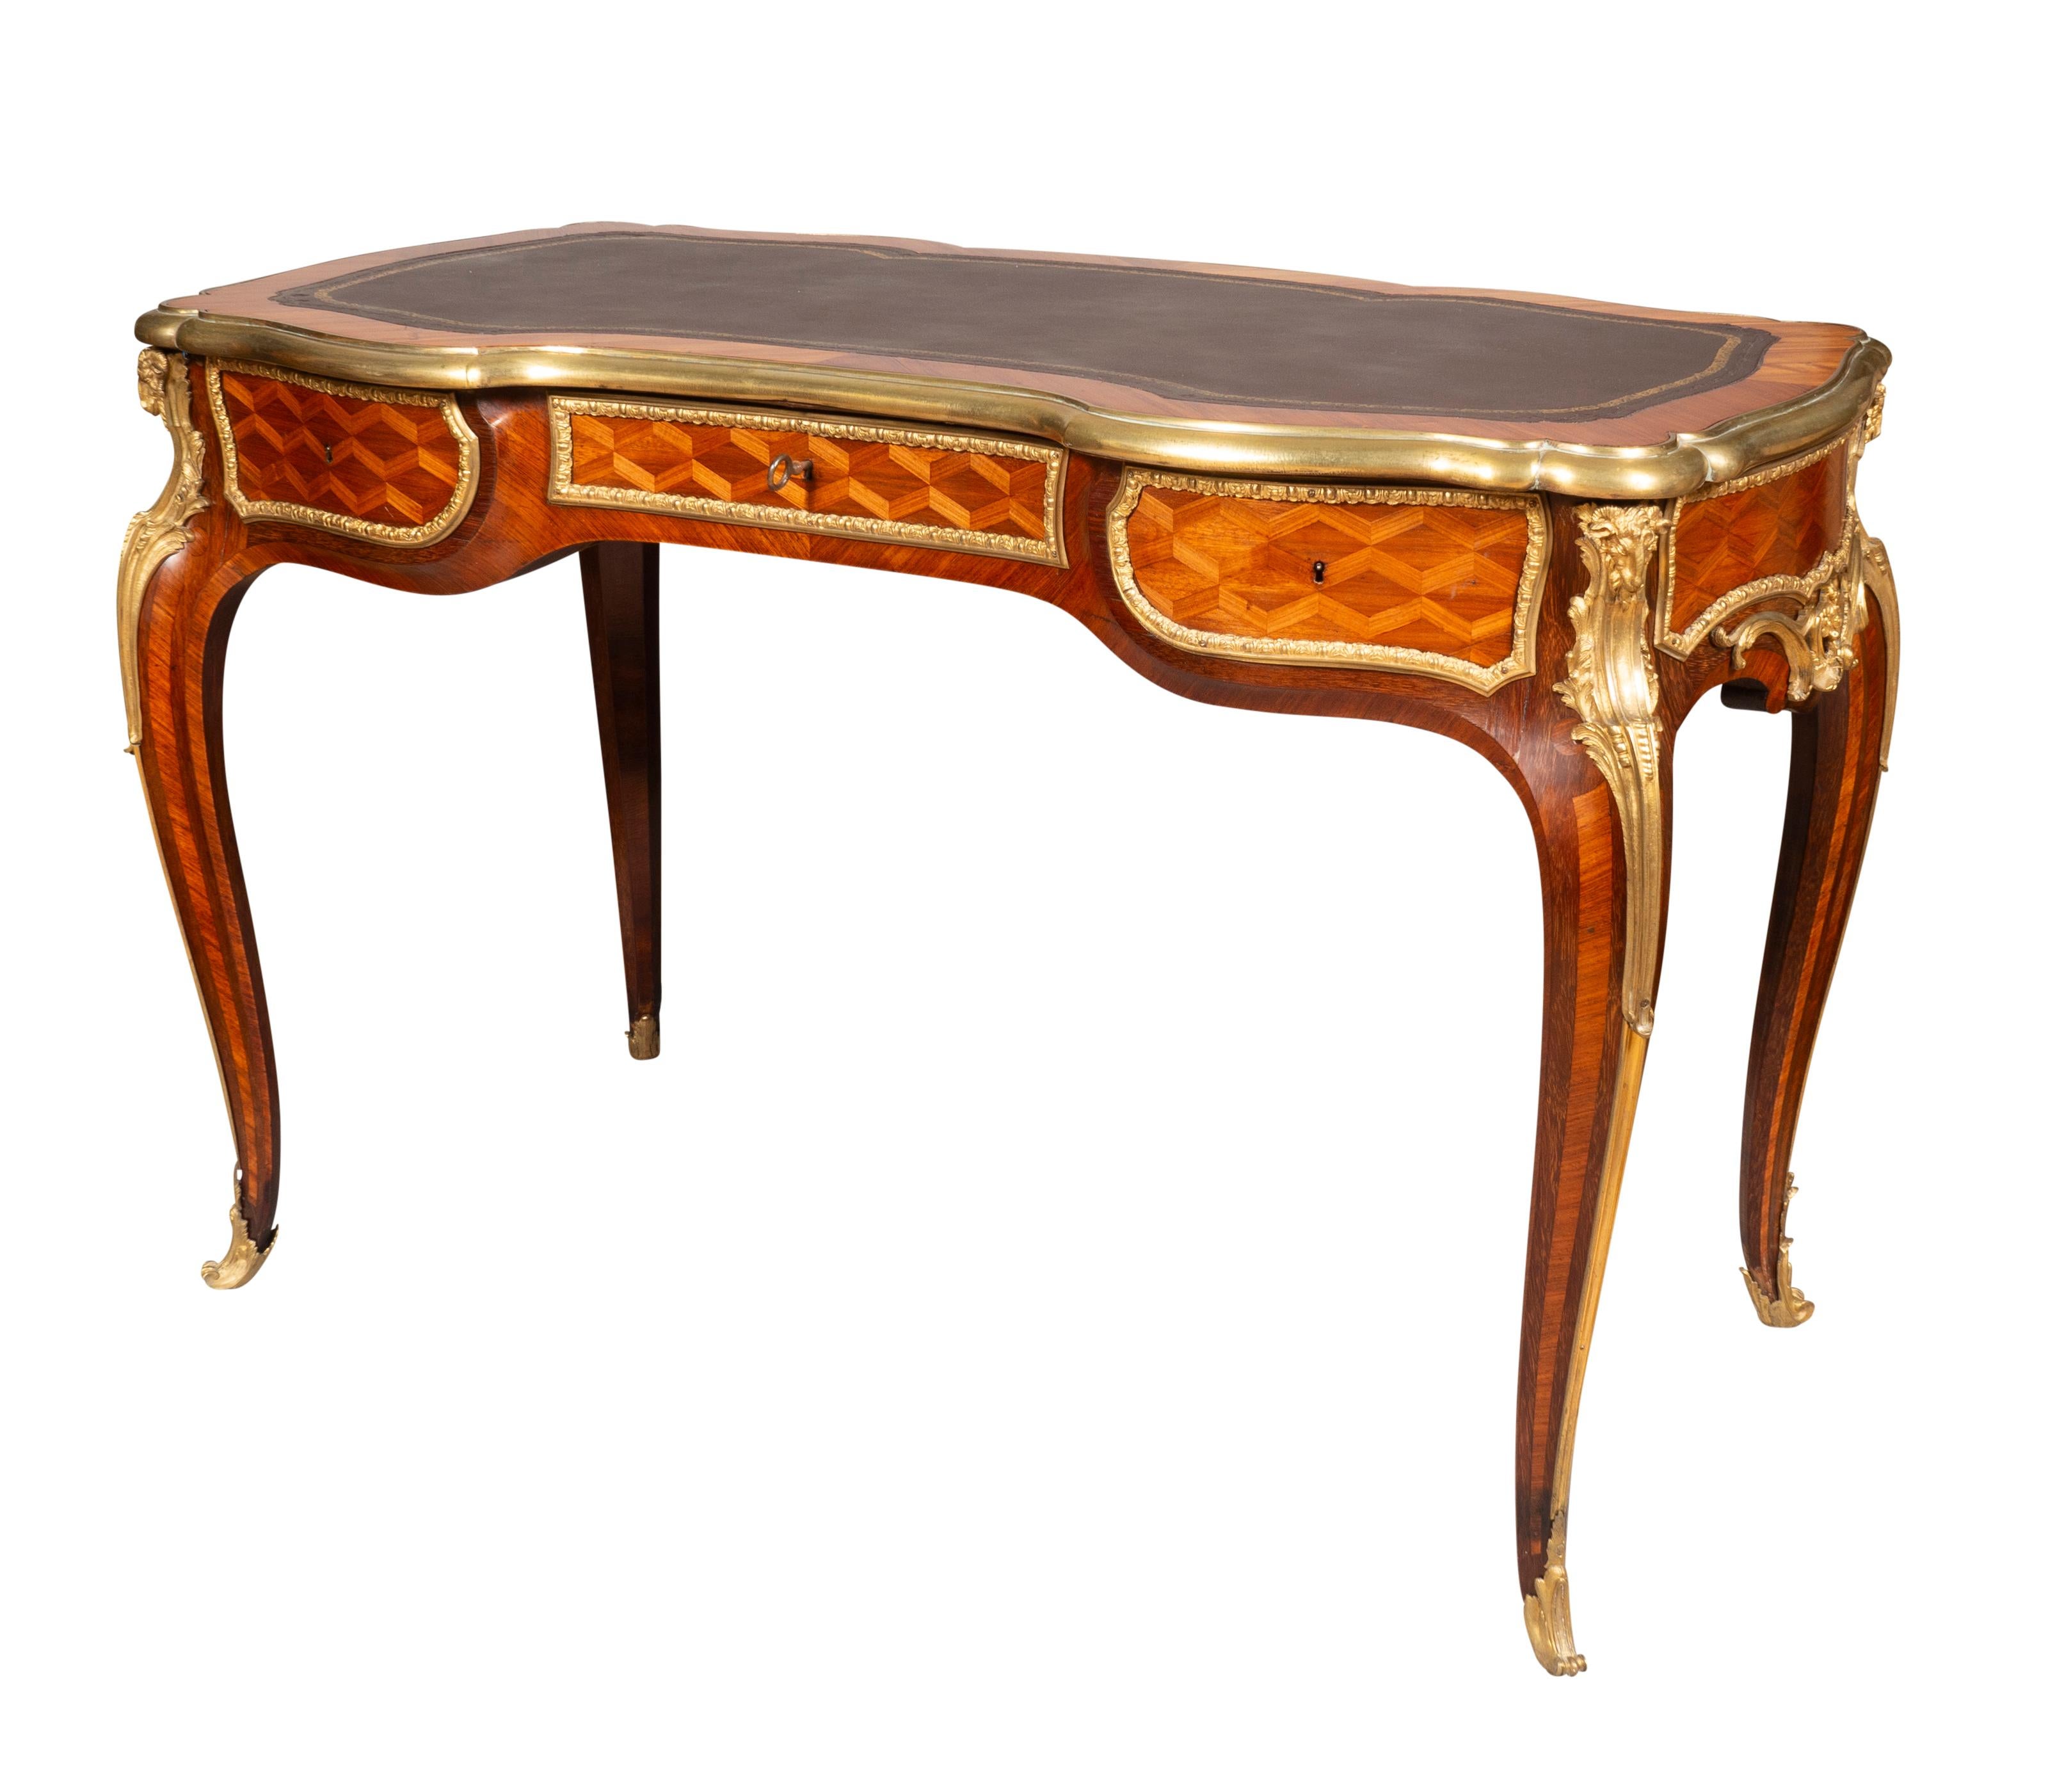 Napoleon III Ormolu Mounted Tulipwood Bureau Plat Attributed To Wassmus In Good Condition For Sale In Essex, MA